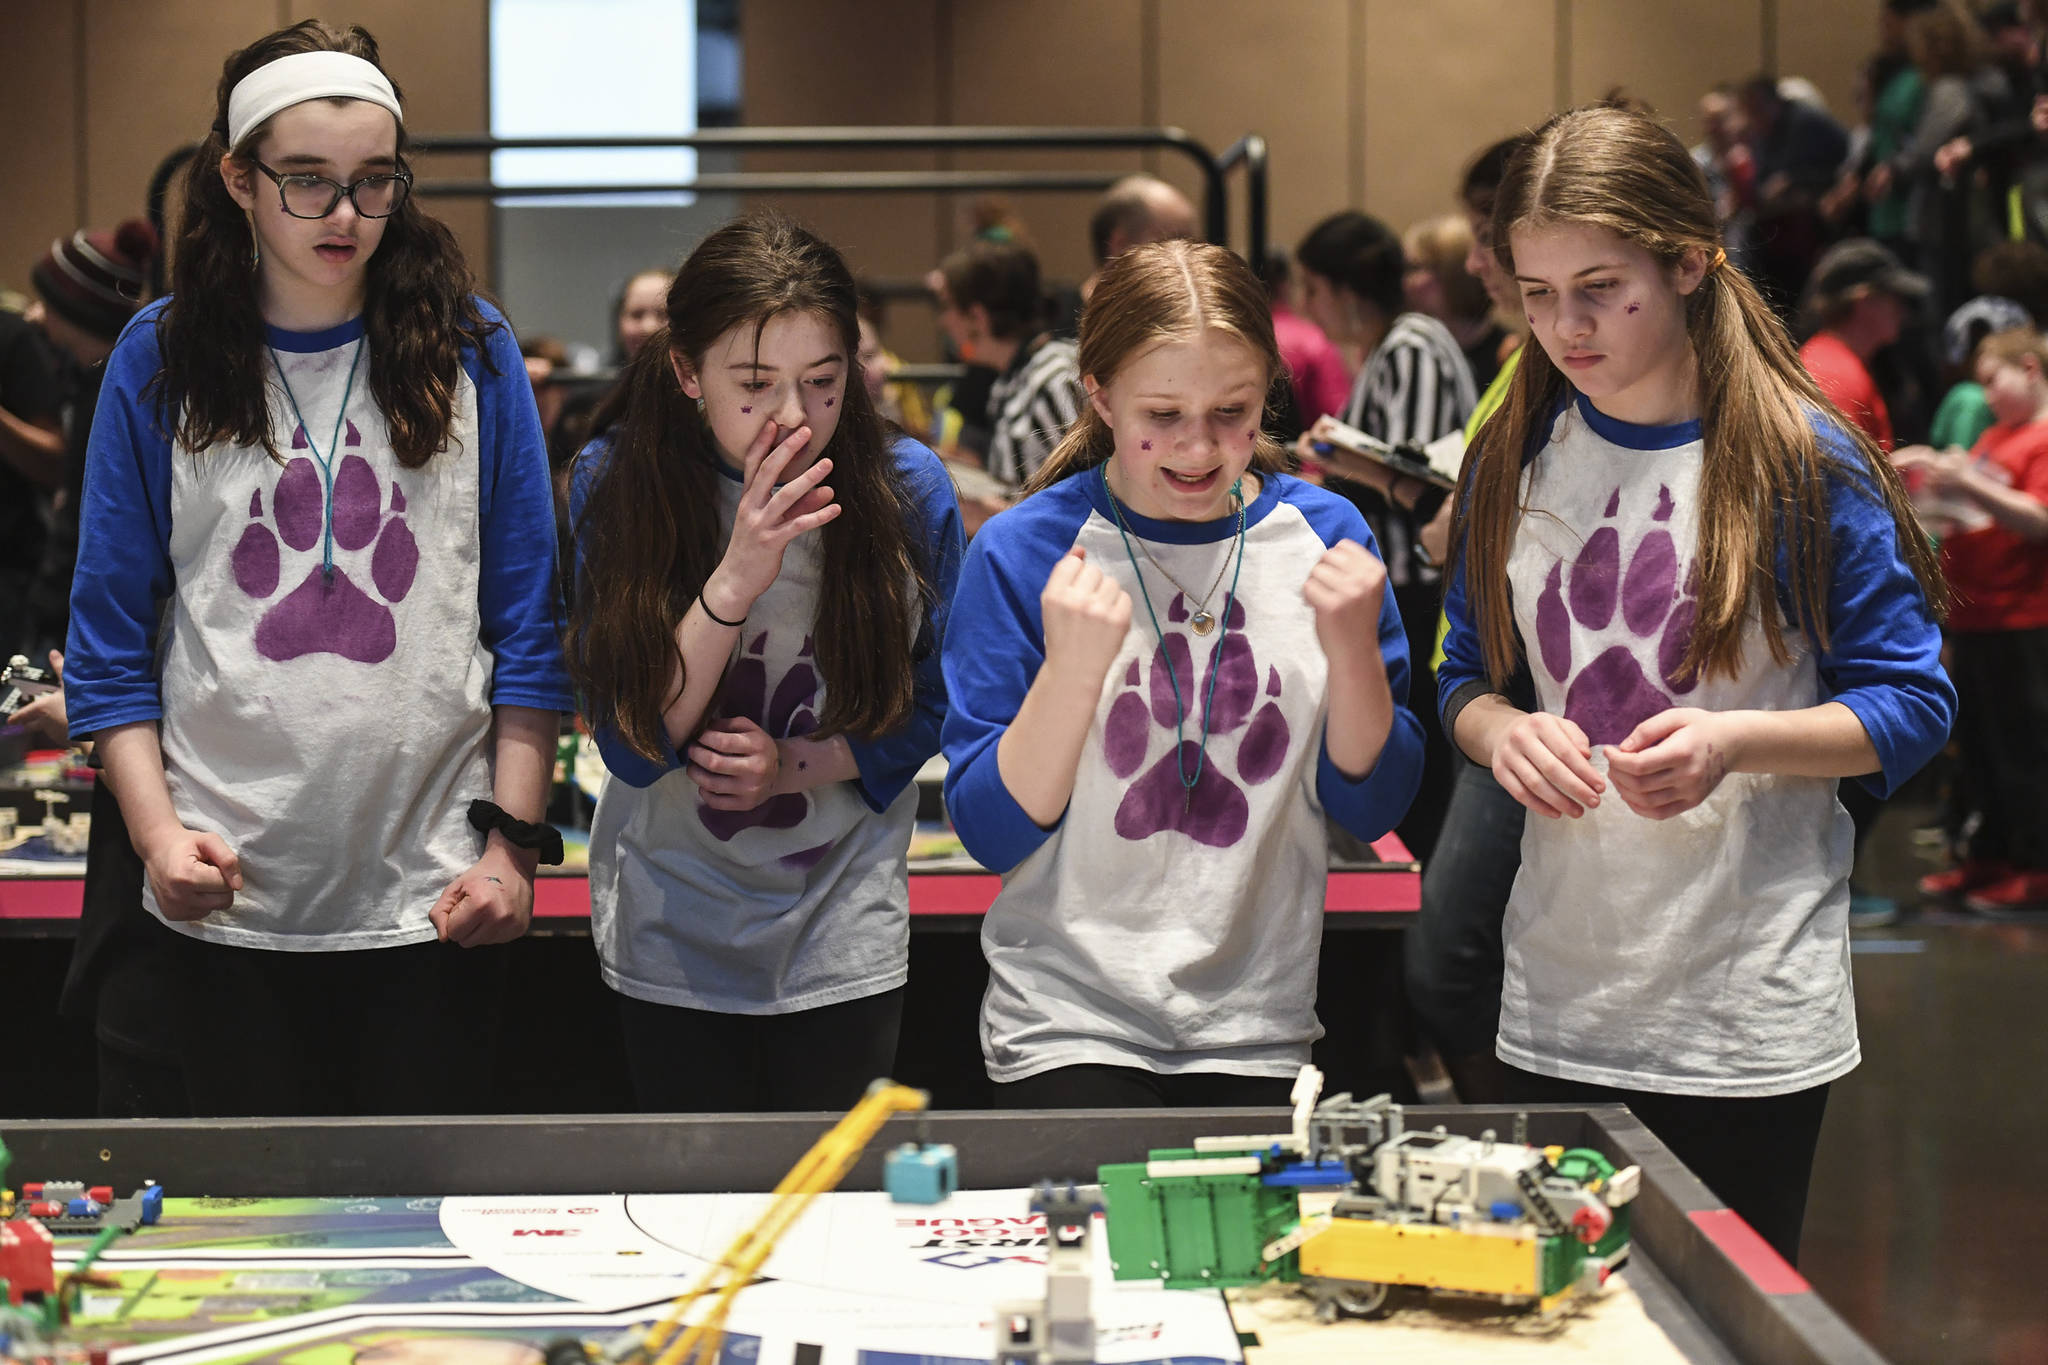 Members of the Tundra Wolves, Rosina Wolfenberger, left, Jerralyn White, Eva Miller and Kennedy White, right, cheer on their robot as they complete in the First Lego League Challenge during the Juneau Robot Jamboree at Centennial Hall on Saturday, Dec. 14, 2019. Twenty teams, two remotely, competed in the First Lego League and four more in the Junior League. the robot performance is one of four parts to the contest. The students are also graded on teamwork, a research project and robot design. Top teams will earn entry to the Alaska State Championship on Feb. 7-8, 2020, at Colony High School. (Michael Penn | Juneau Empire)